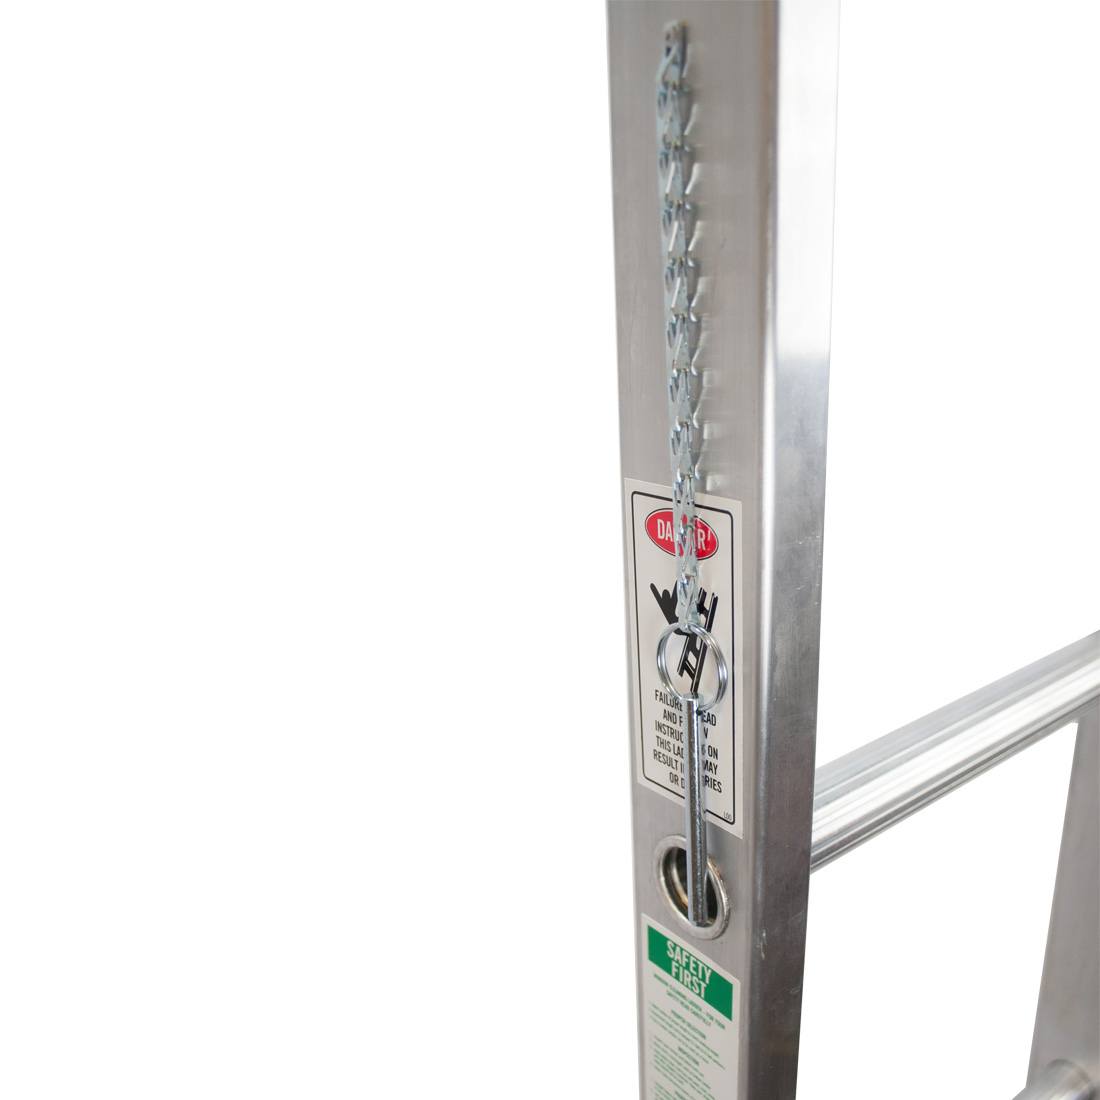 Metallic Ladder Aluminum Bottom Section - 6 Foot - Decal and Ladder Pin View